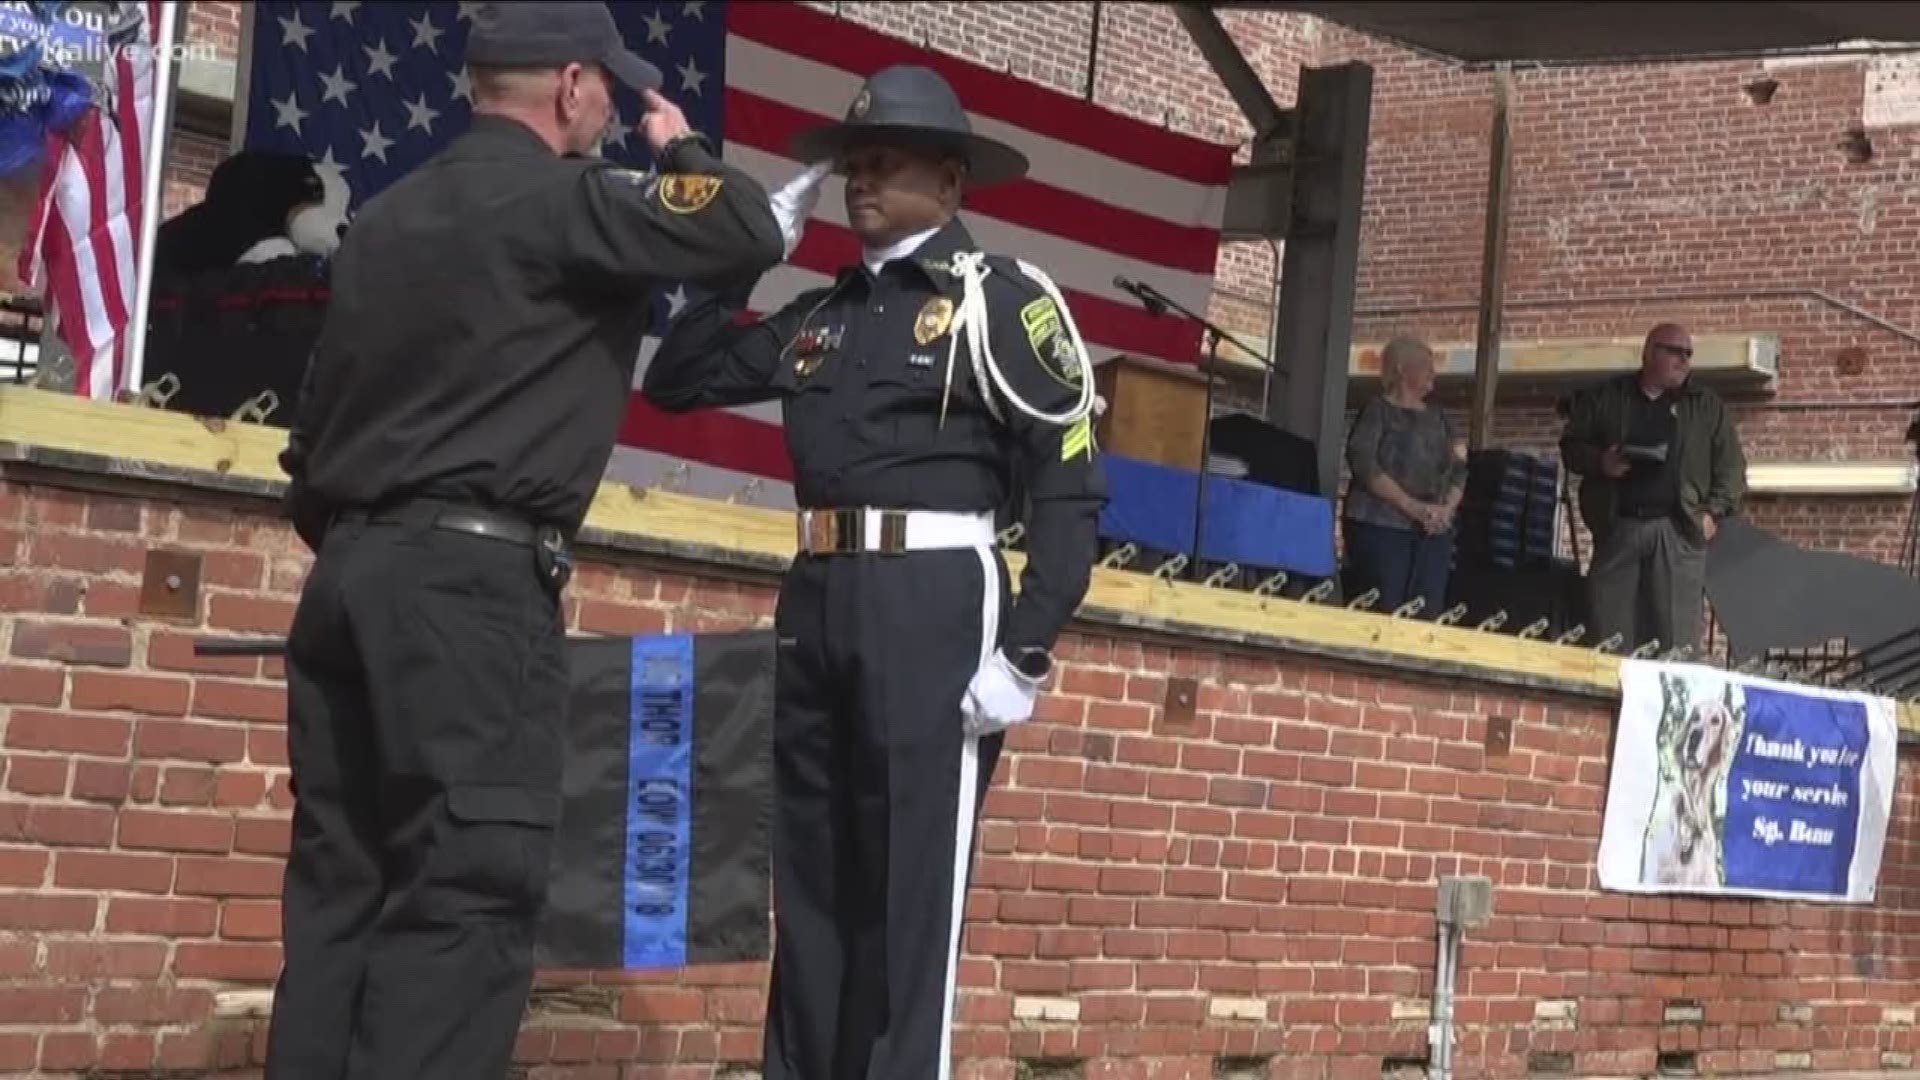 The only memorial for police dogs in the country takes place in Porterdale, Georgia. It was inspired by a dog, Beau, who everyone wanted to remember.